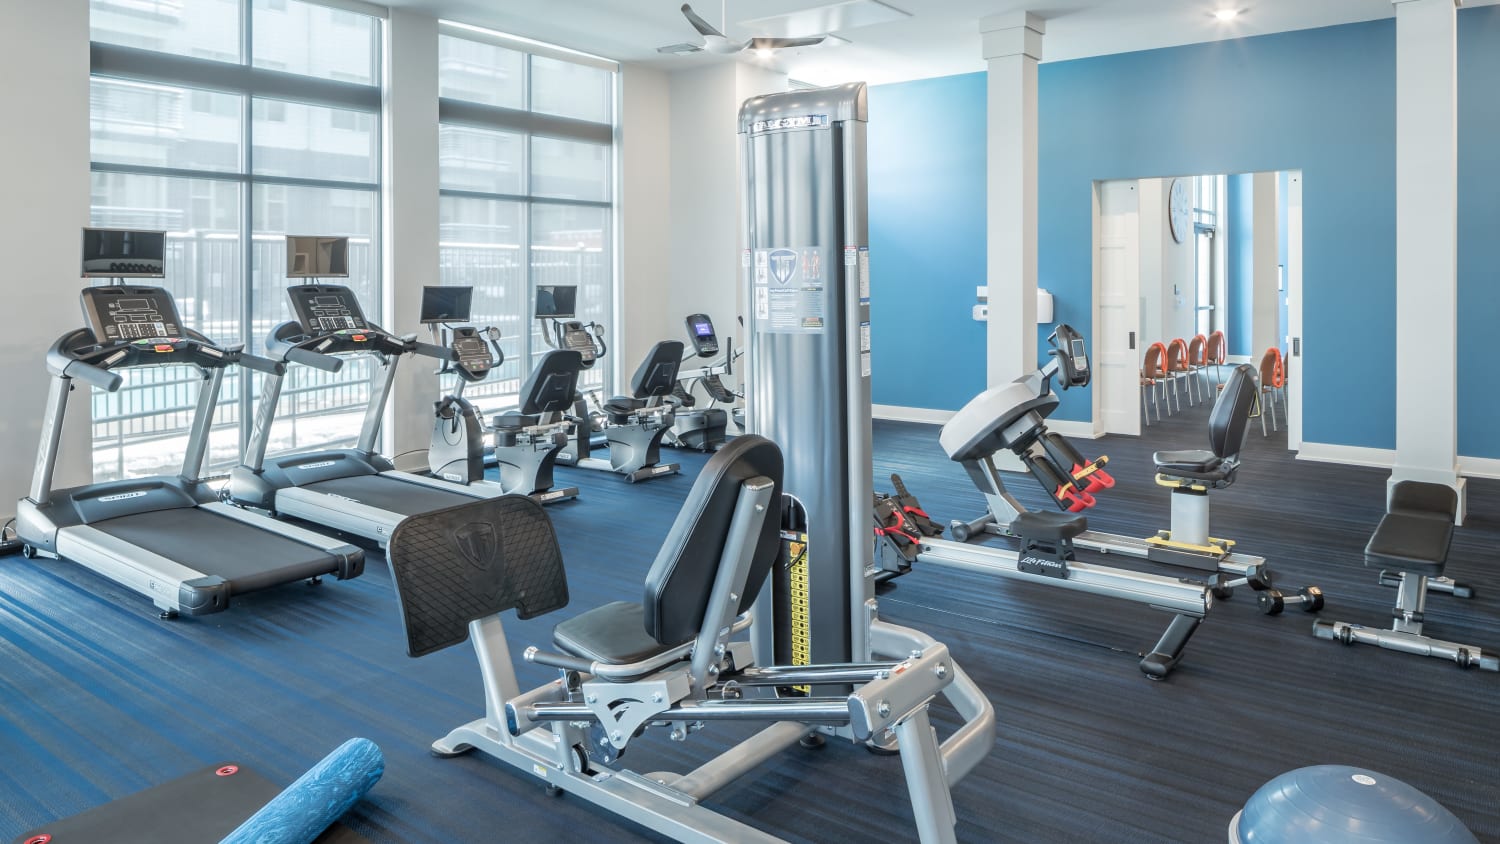 Fitness center at our over 55 apartments in Lakewood, CO, featuring exercise equipment, weights, and large windows. 